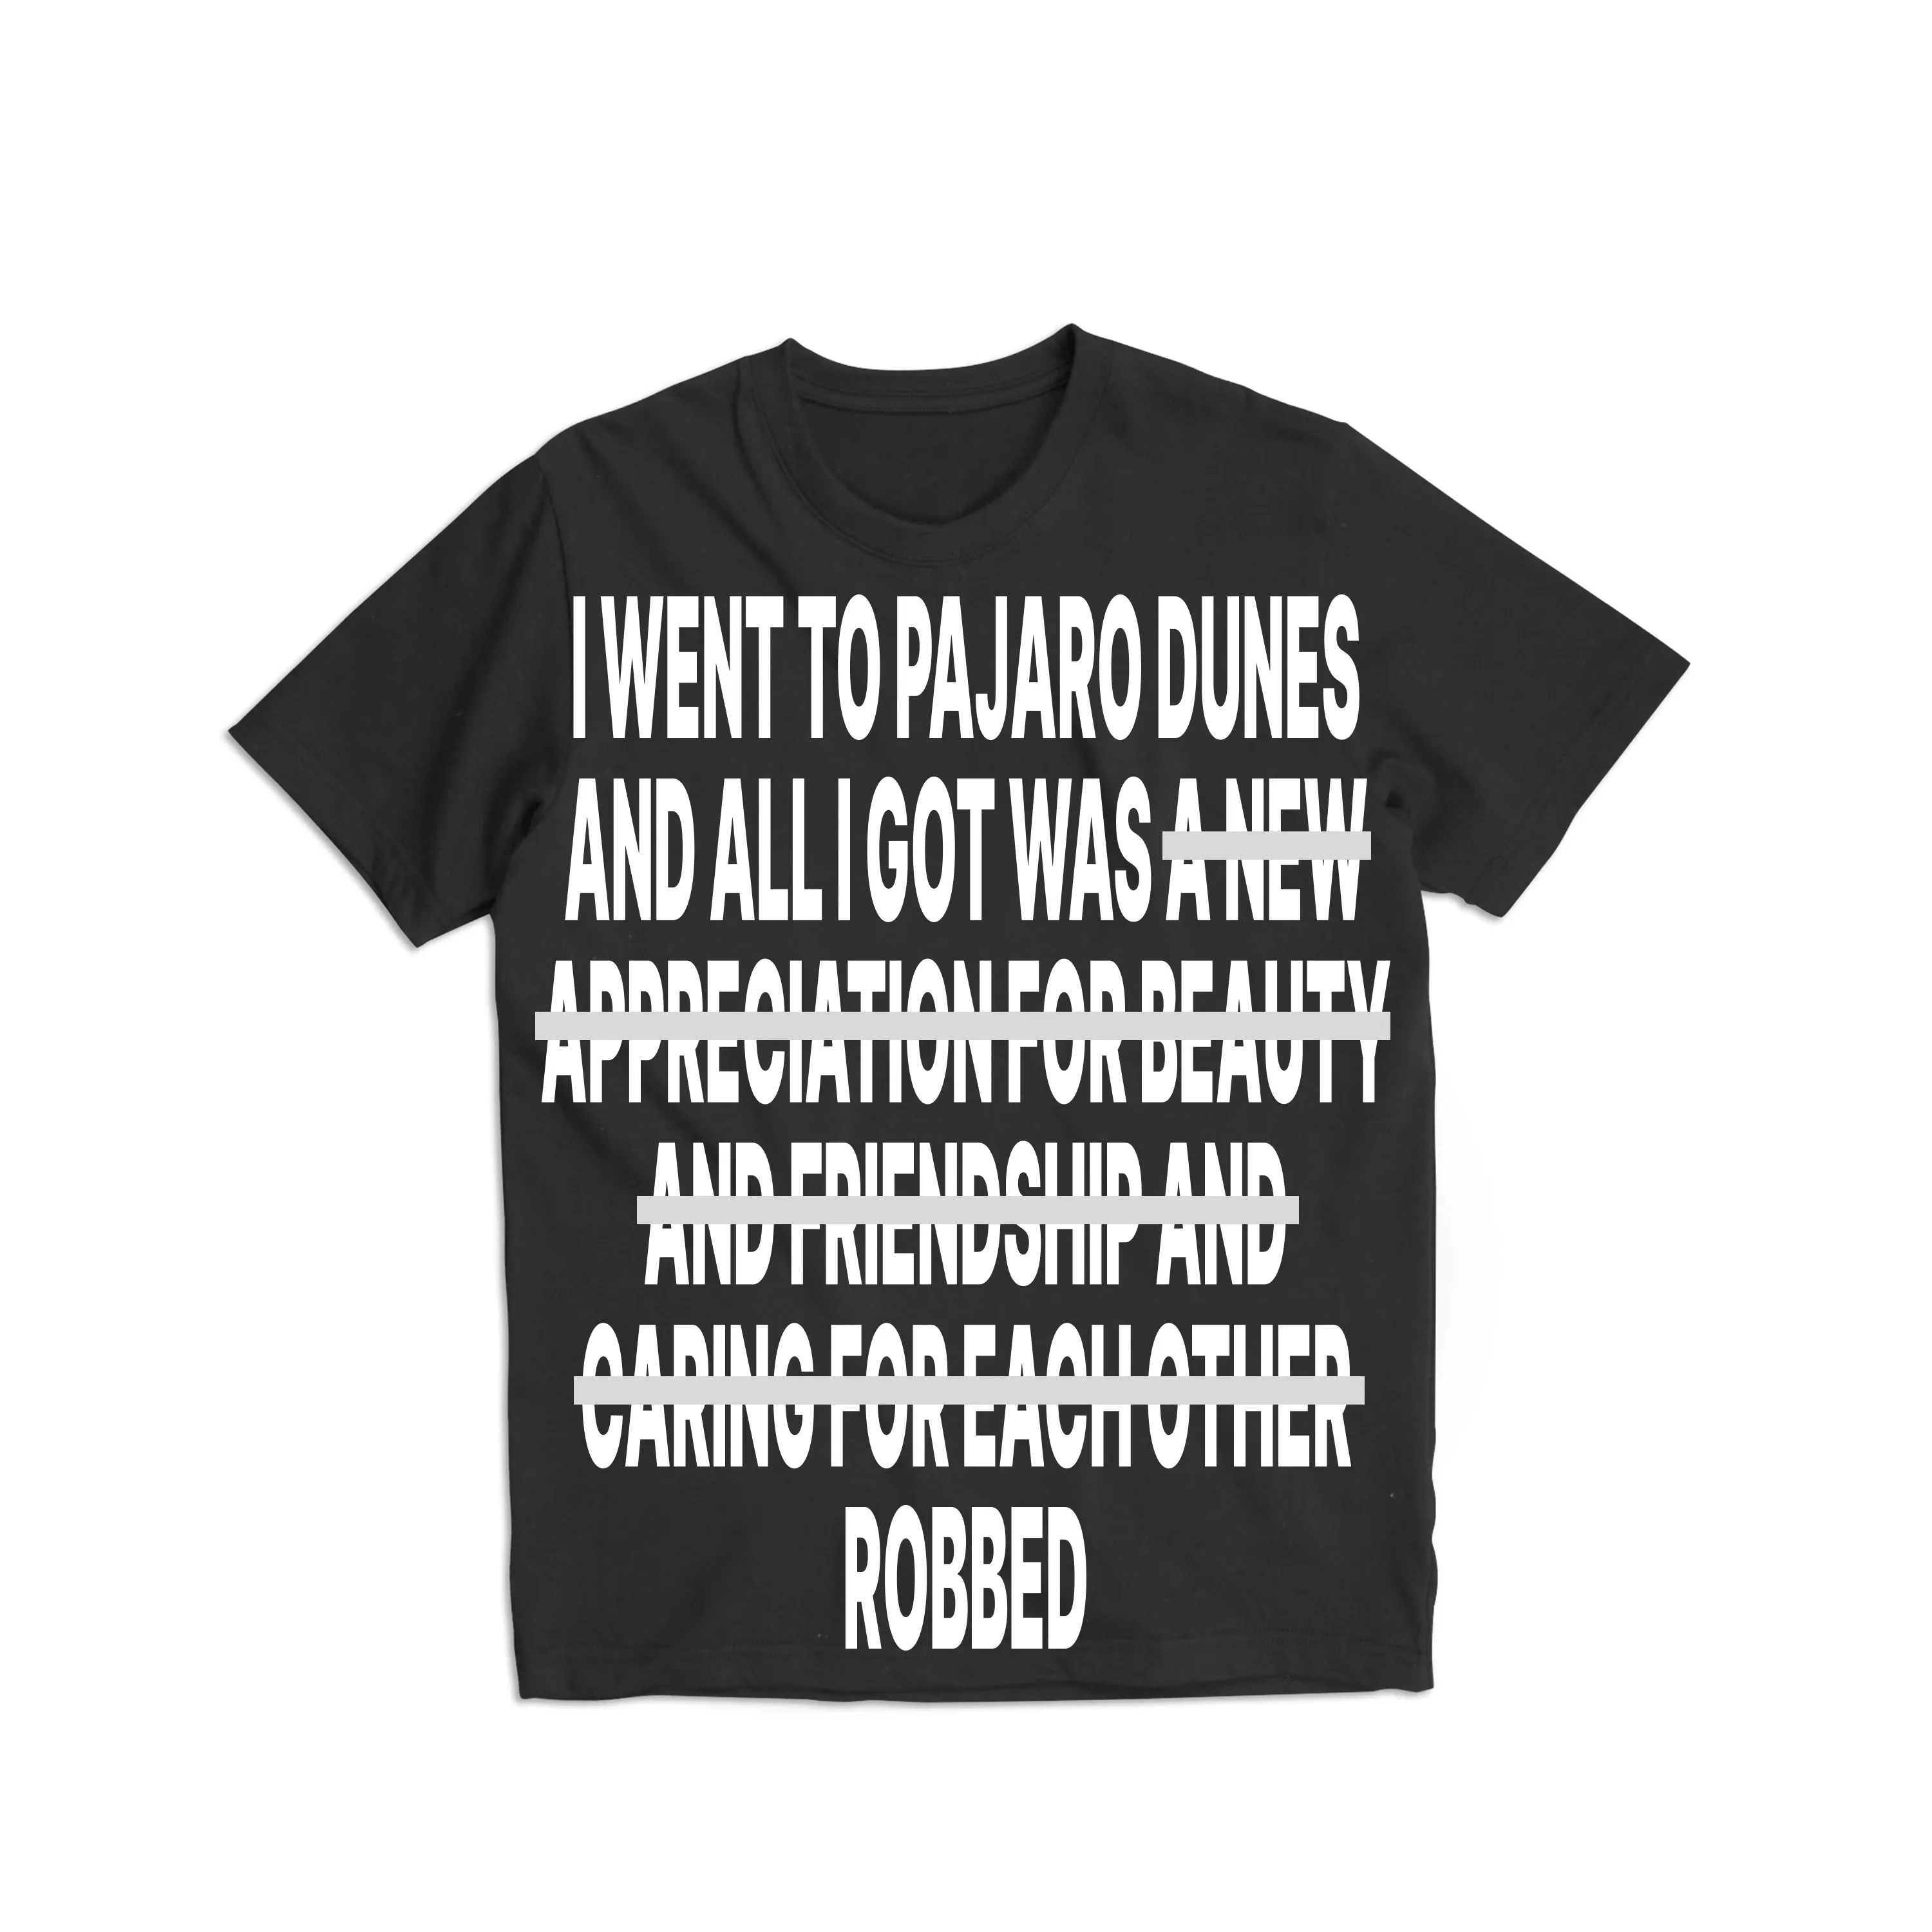 A merch concept sketch. A black shirt with bold text set in Impact: 'I WENT TO PAJARO DUNES AND ALL I GOT WAS ~~A NEW APPRECIATION FOR BEAUTY AND FRIENDSHIP AND CARING FOR EACH OTHER~~ ROBBED. The text between the two ~~ characters is crossed out.'